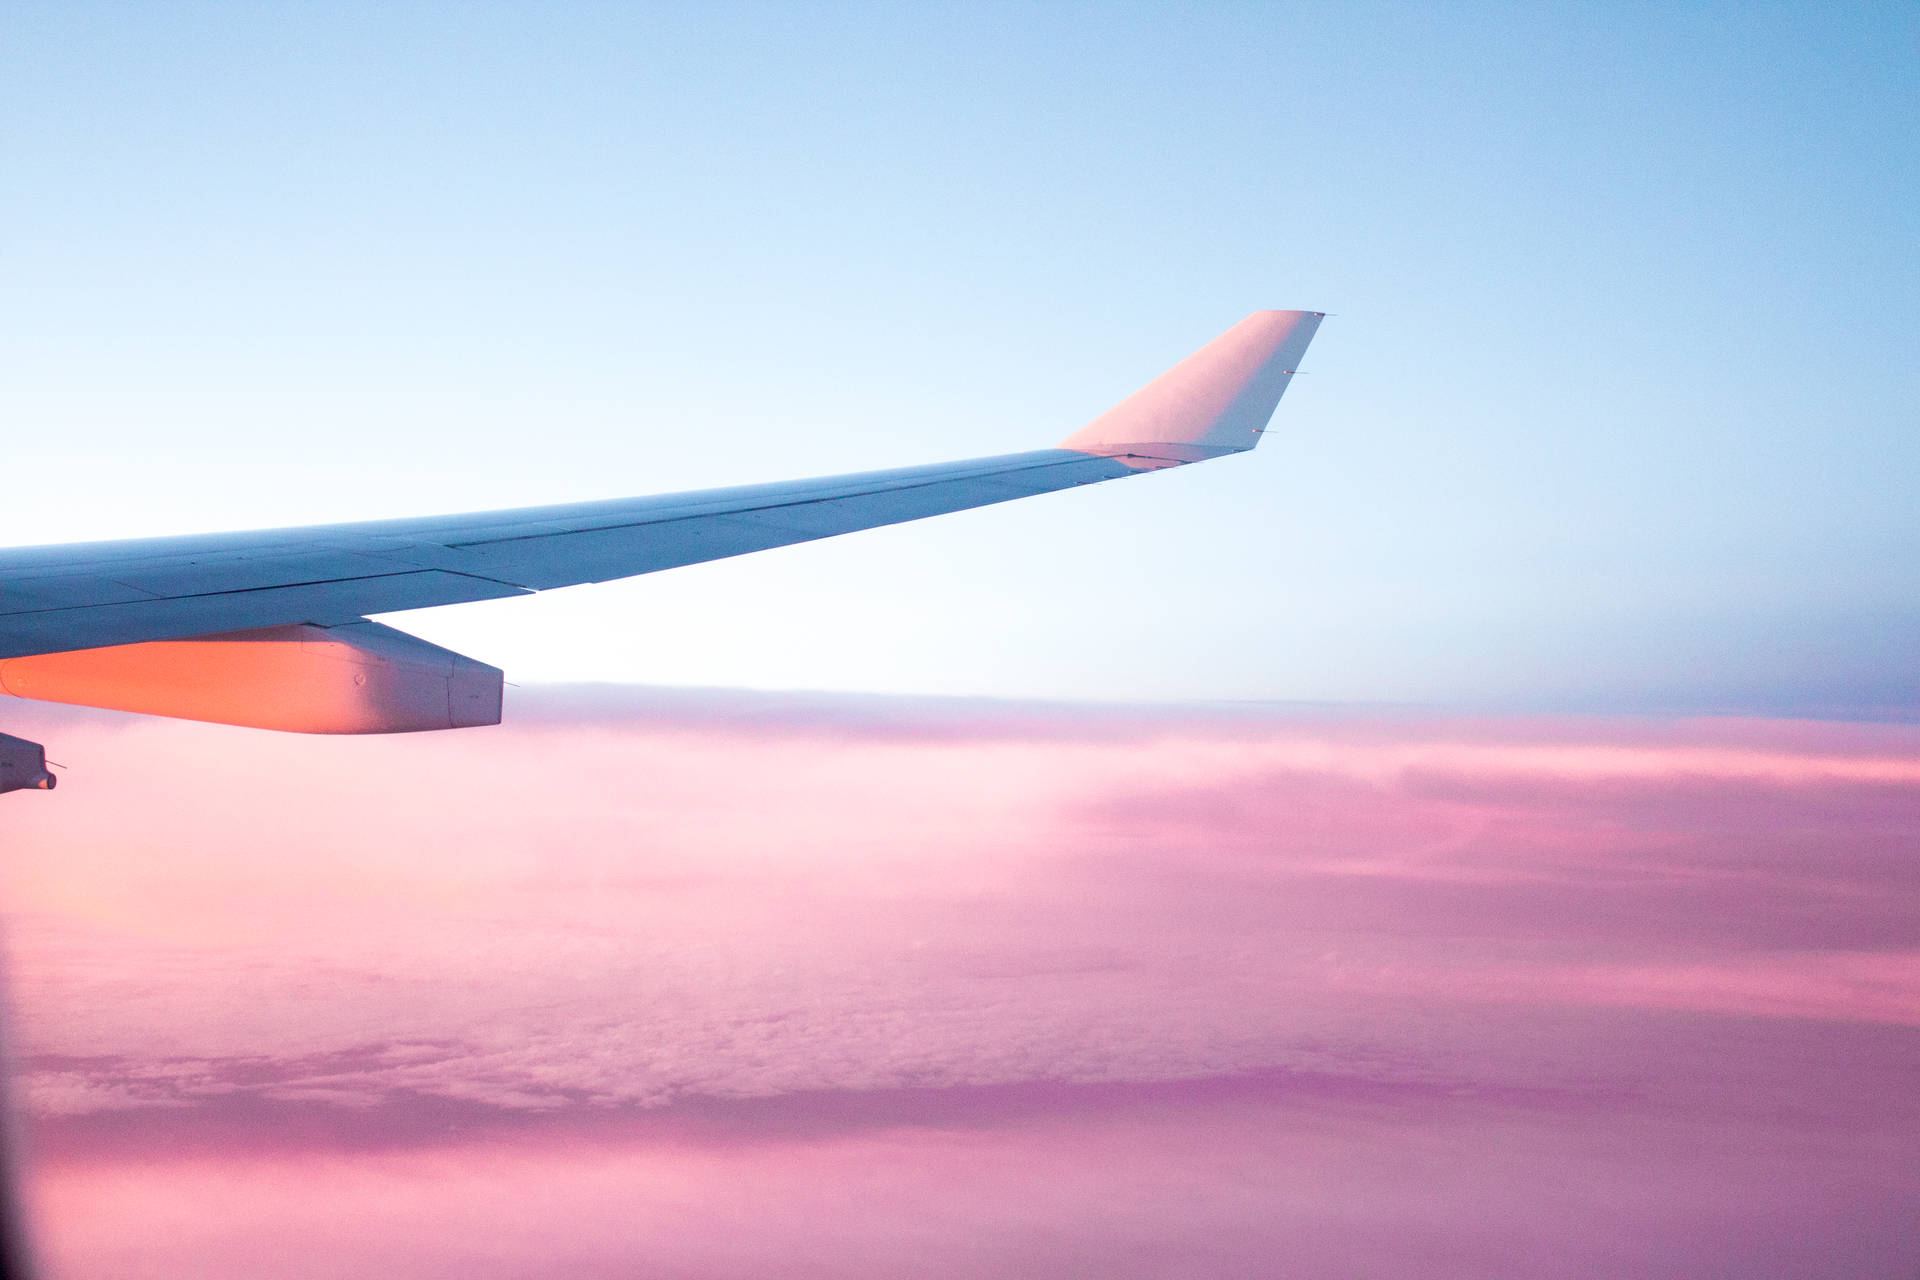 Plane Wing In Pink Sky Background